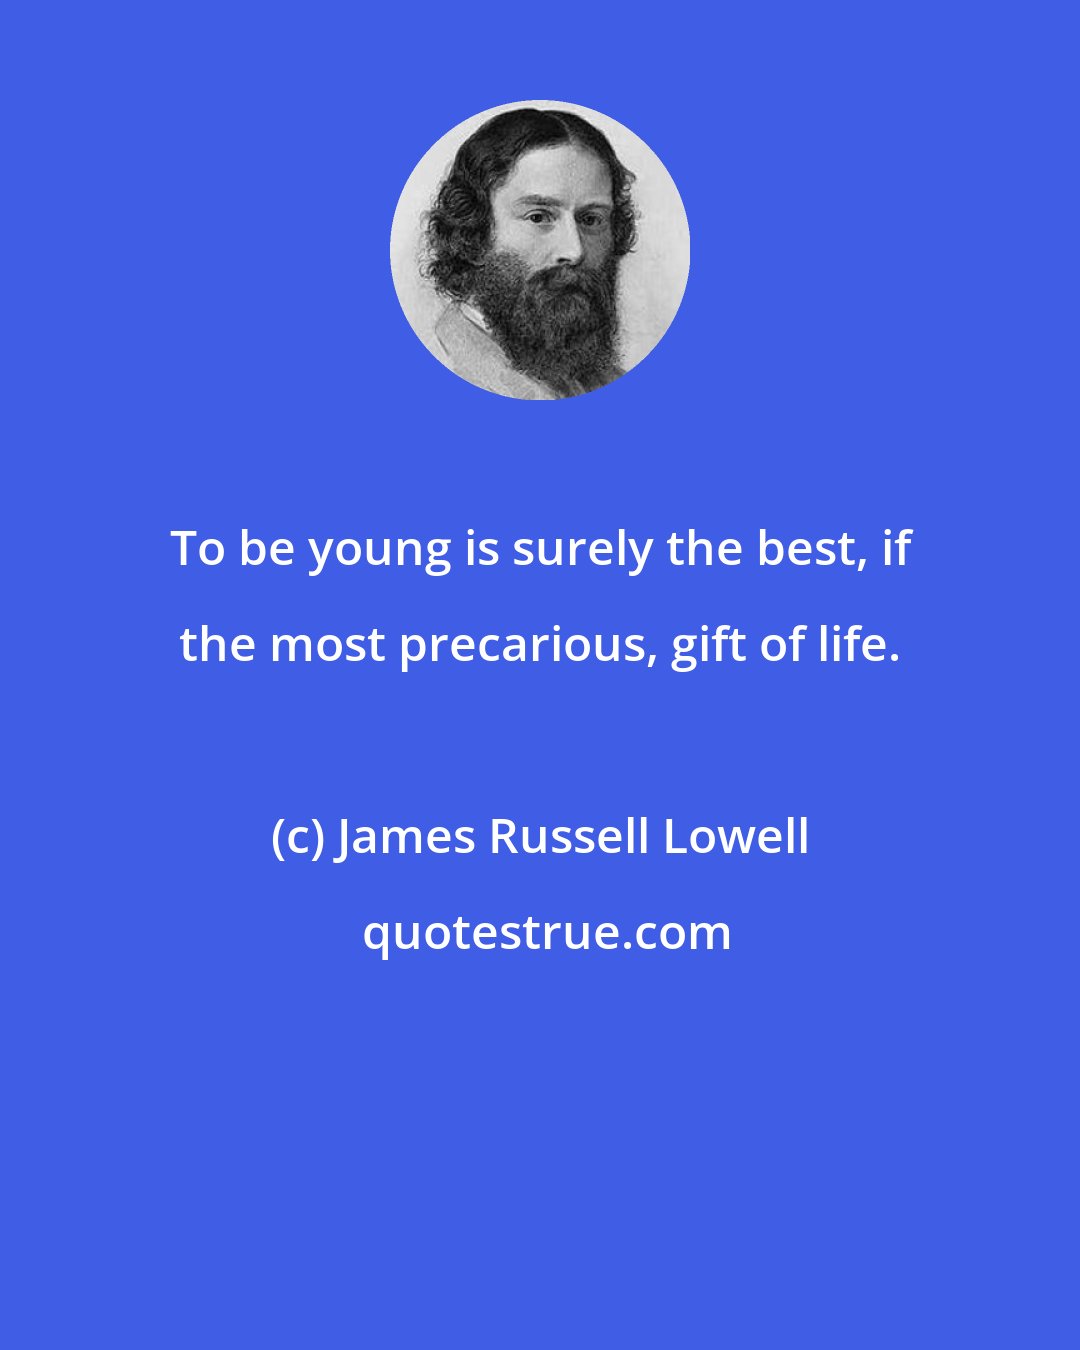 James Russell Lowell: To be young is surely the best, if the most precarious, gift of life.